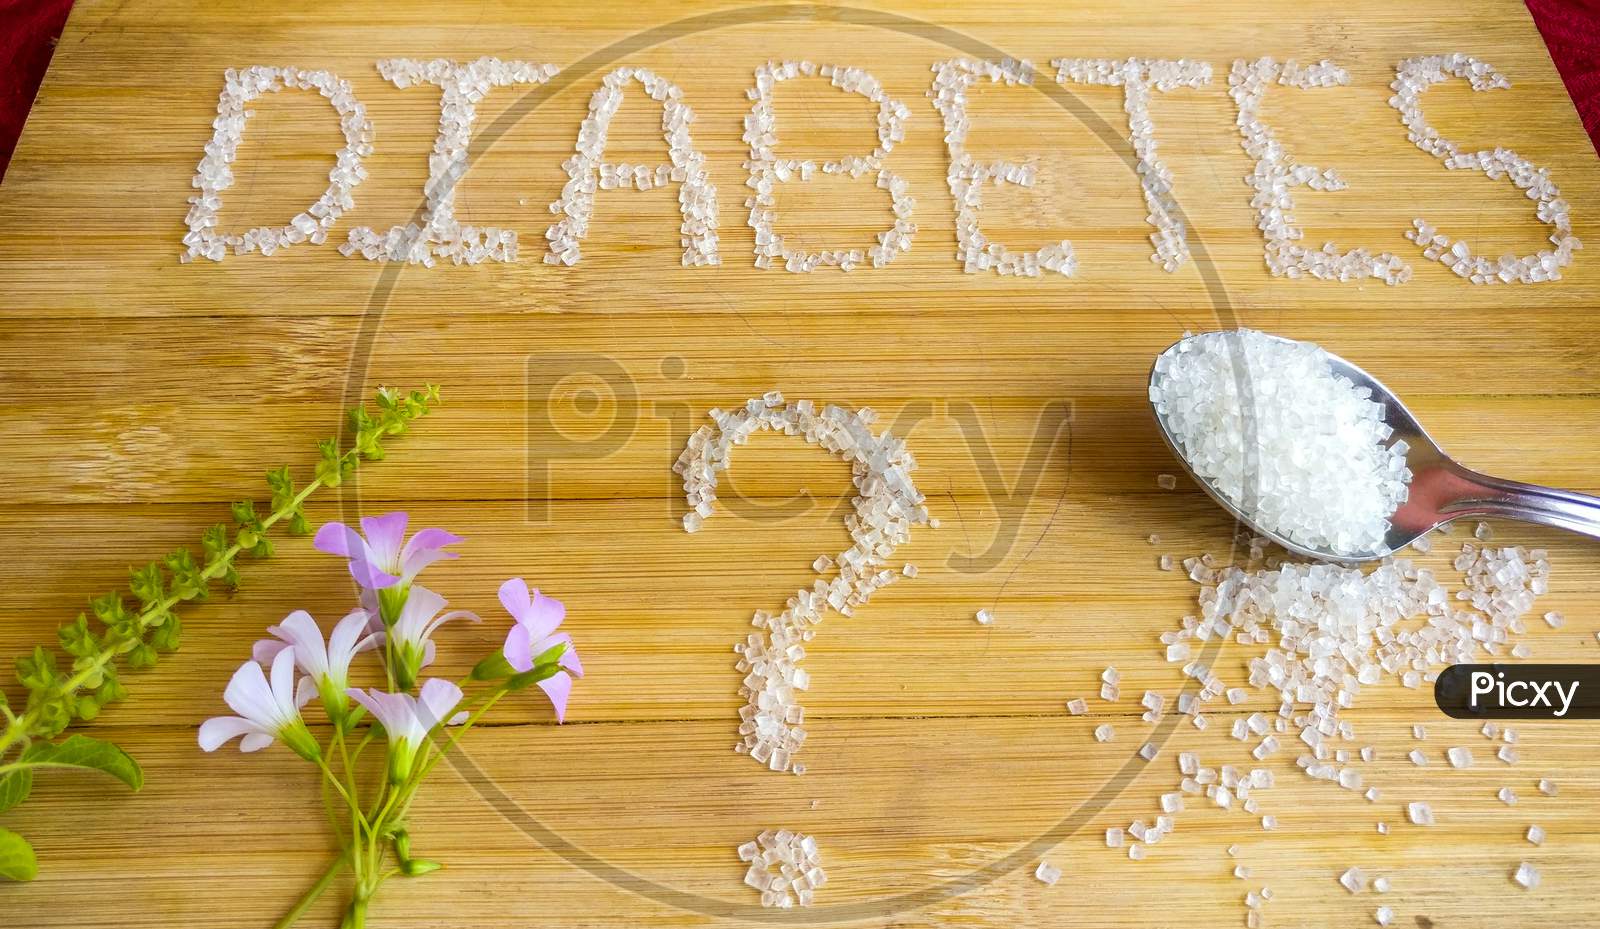 Diabetes written on wooden board with sugar. Tablets, flowers, Basil, spoon of sugar used.top angle shoot